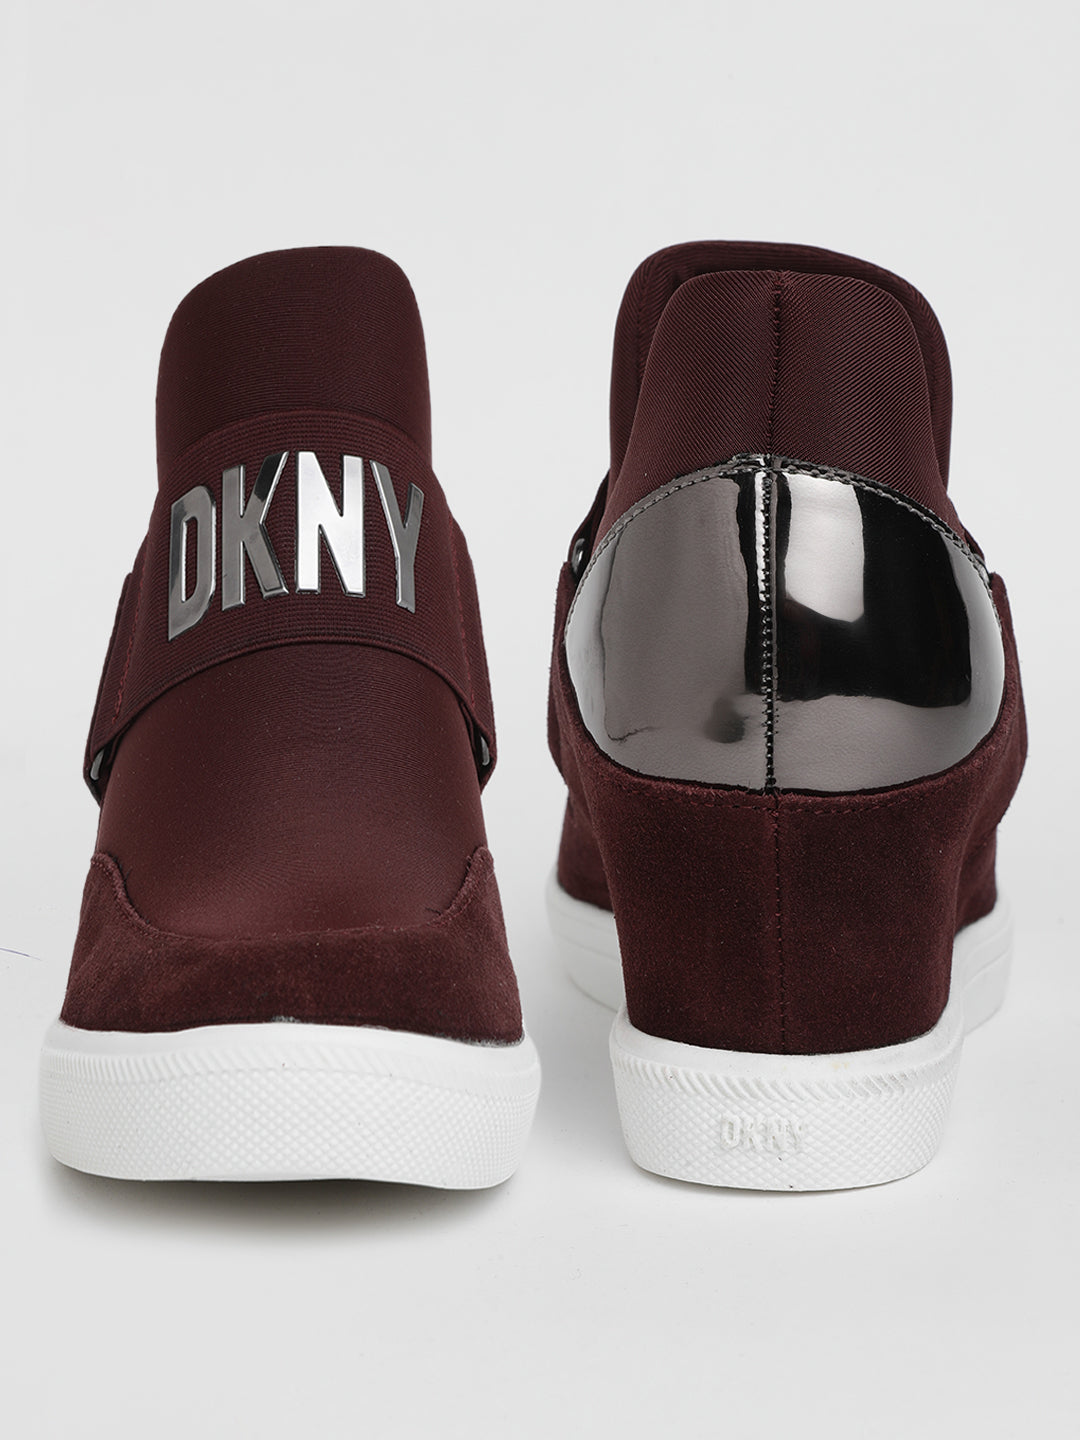 DKNY Sneakers White for Women